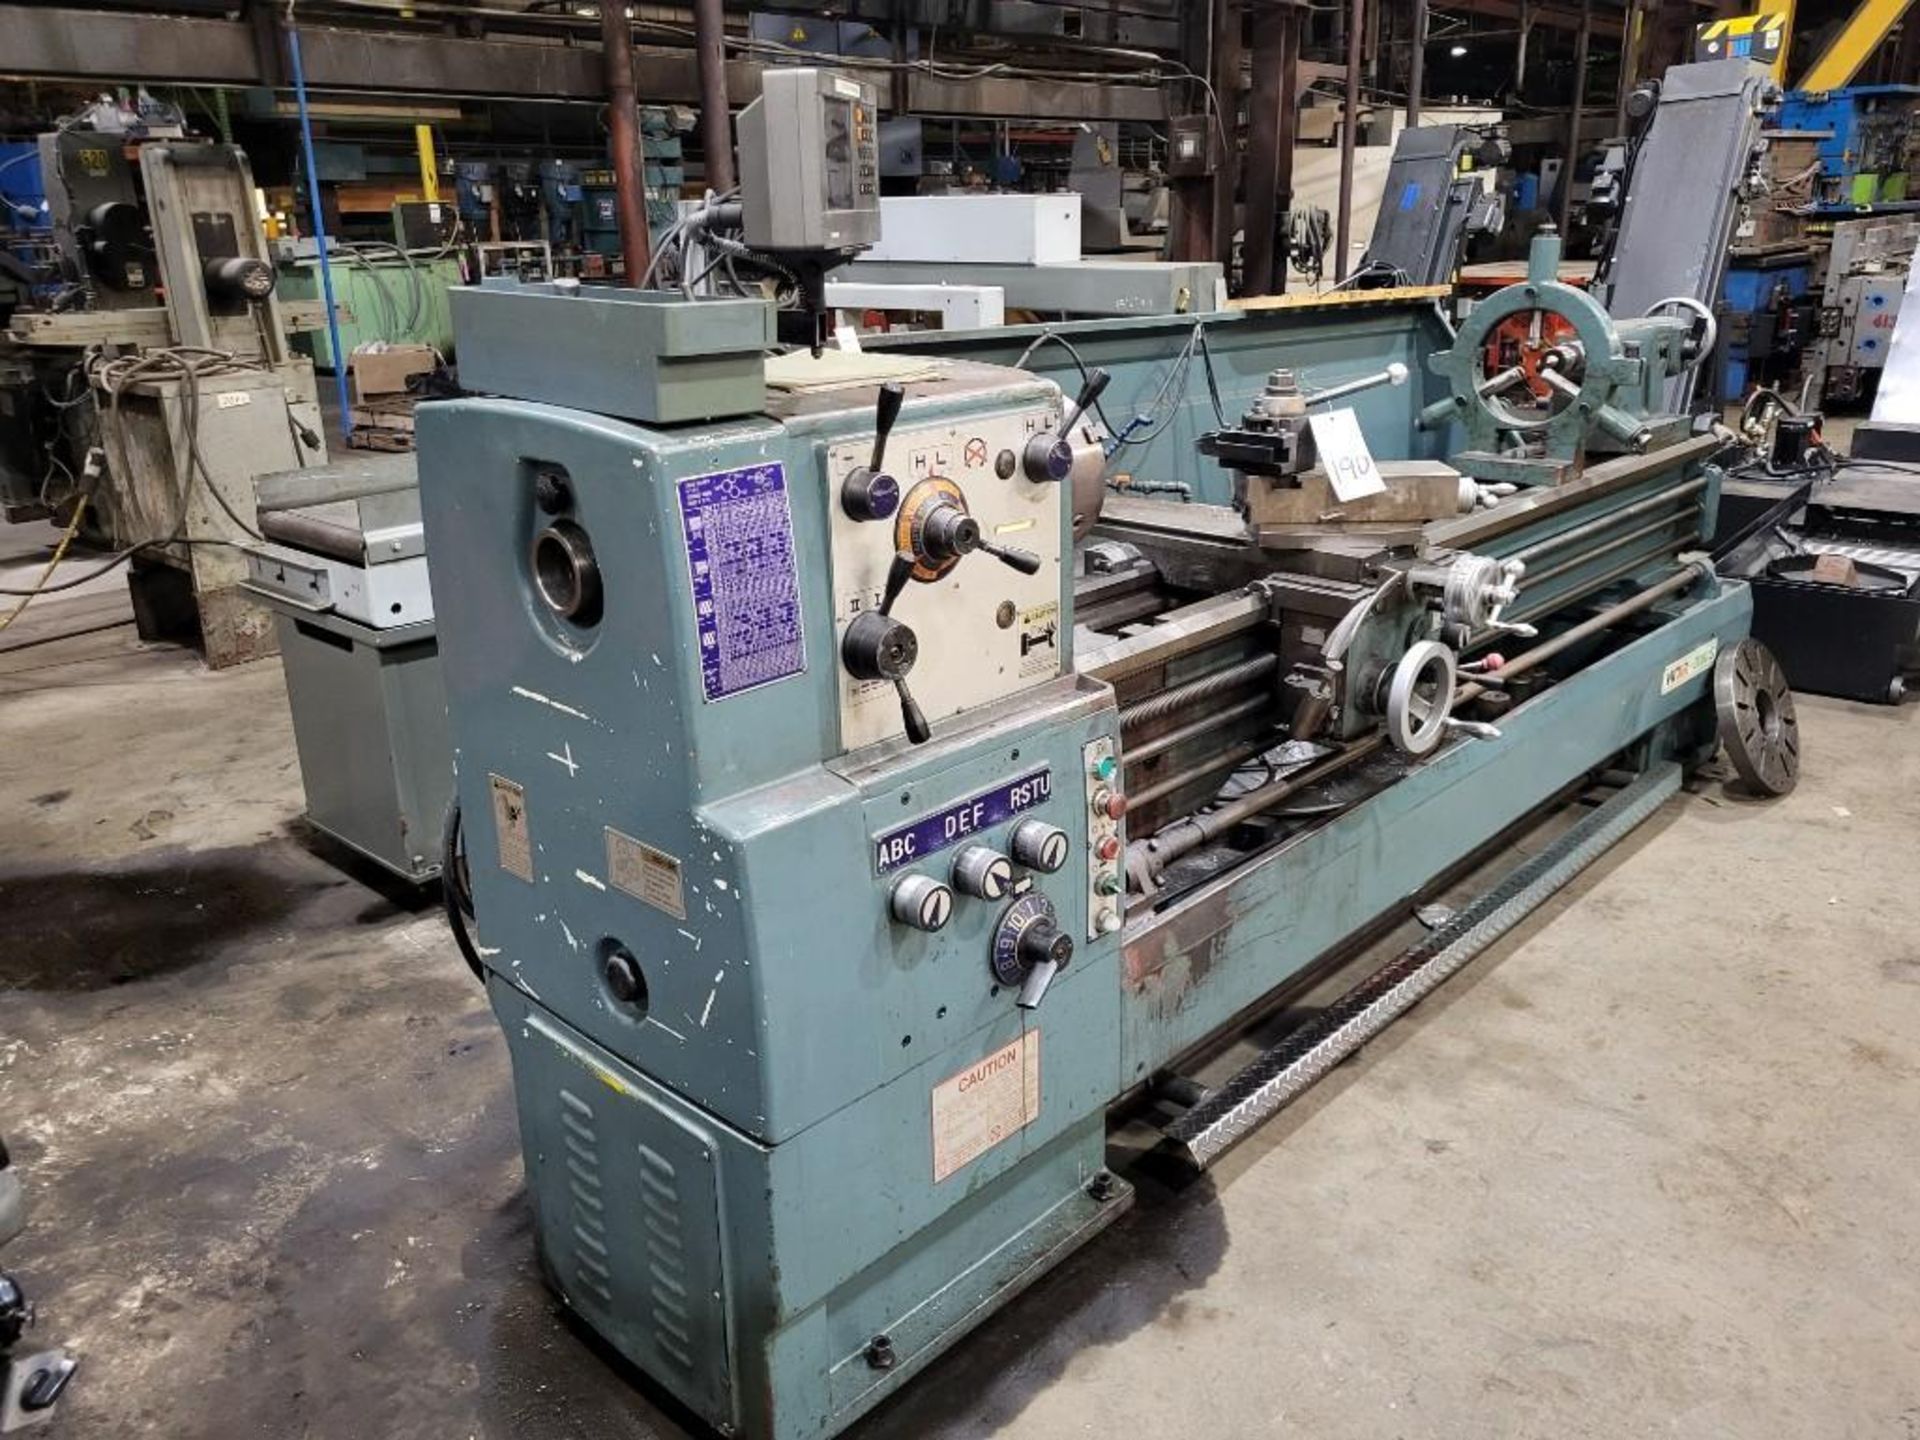 VICTOR 2080S 20" X 80" GAP BED PRECISION LATHE, WITH TAILSTOCK, CHUCK, STEADY REST, TOOLING - Image 3 of 28